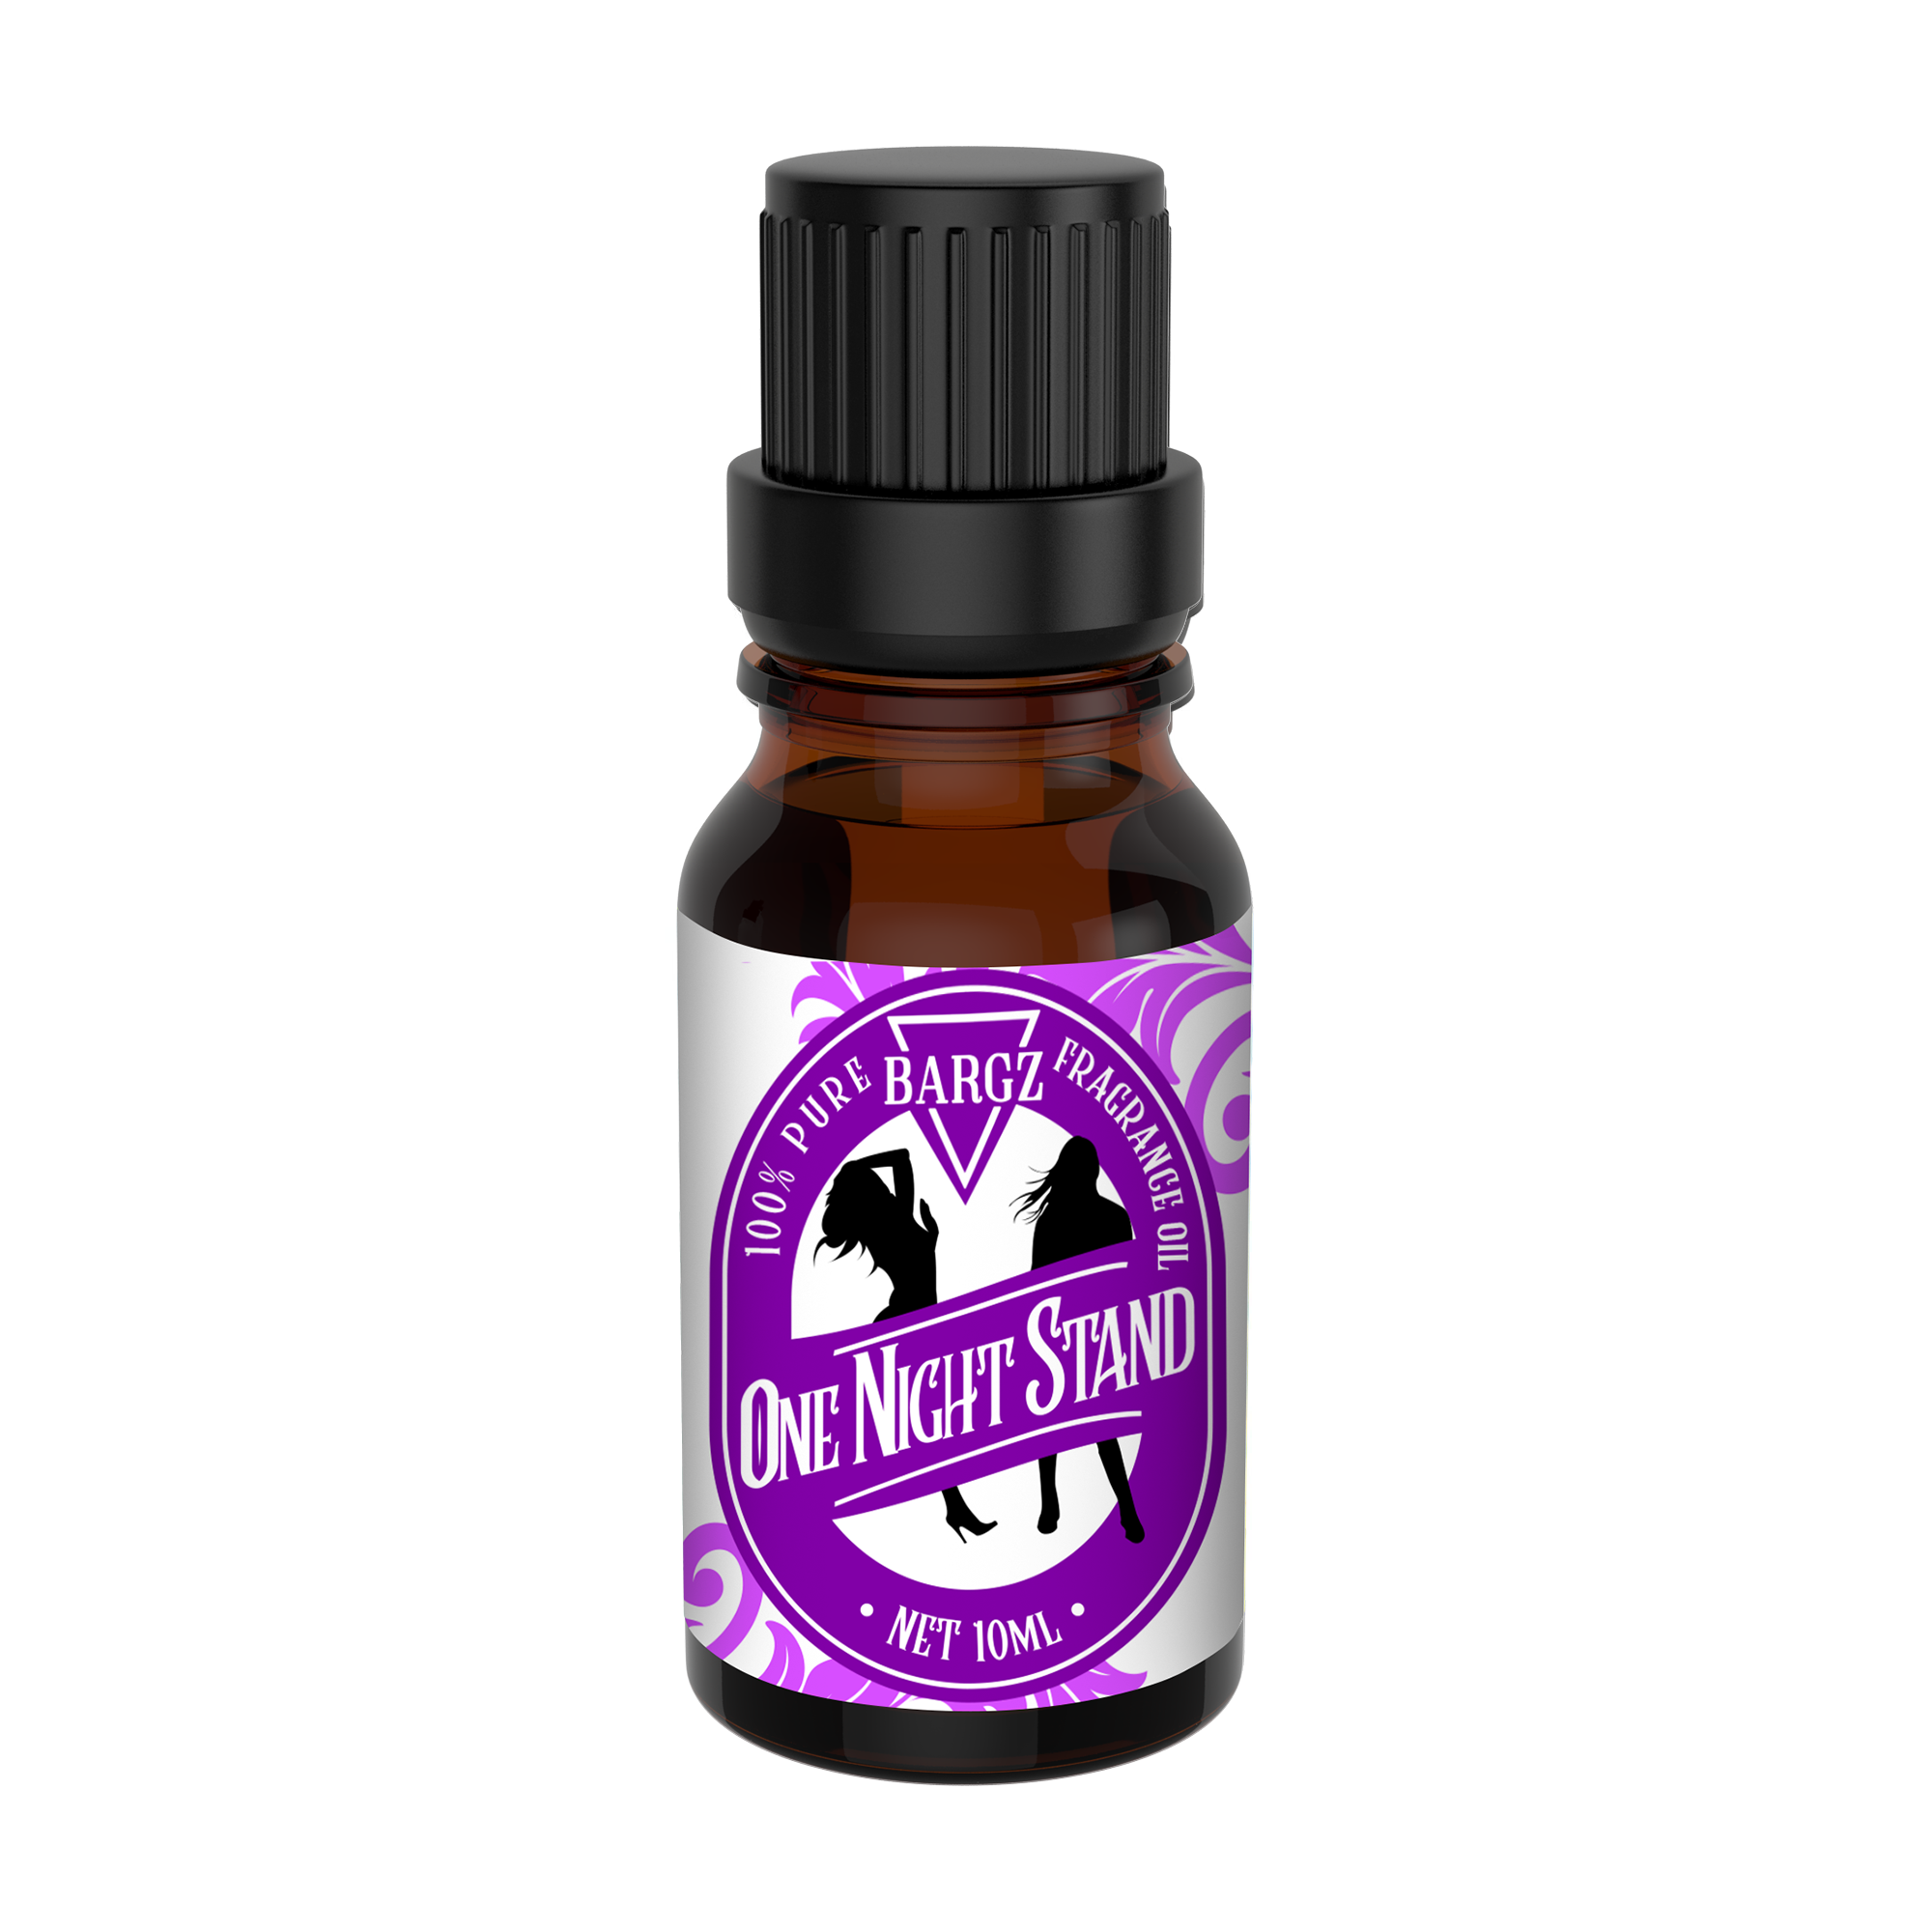 Bargz One Night Stand Fragrance Oil